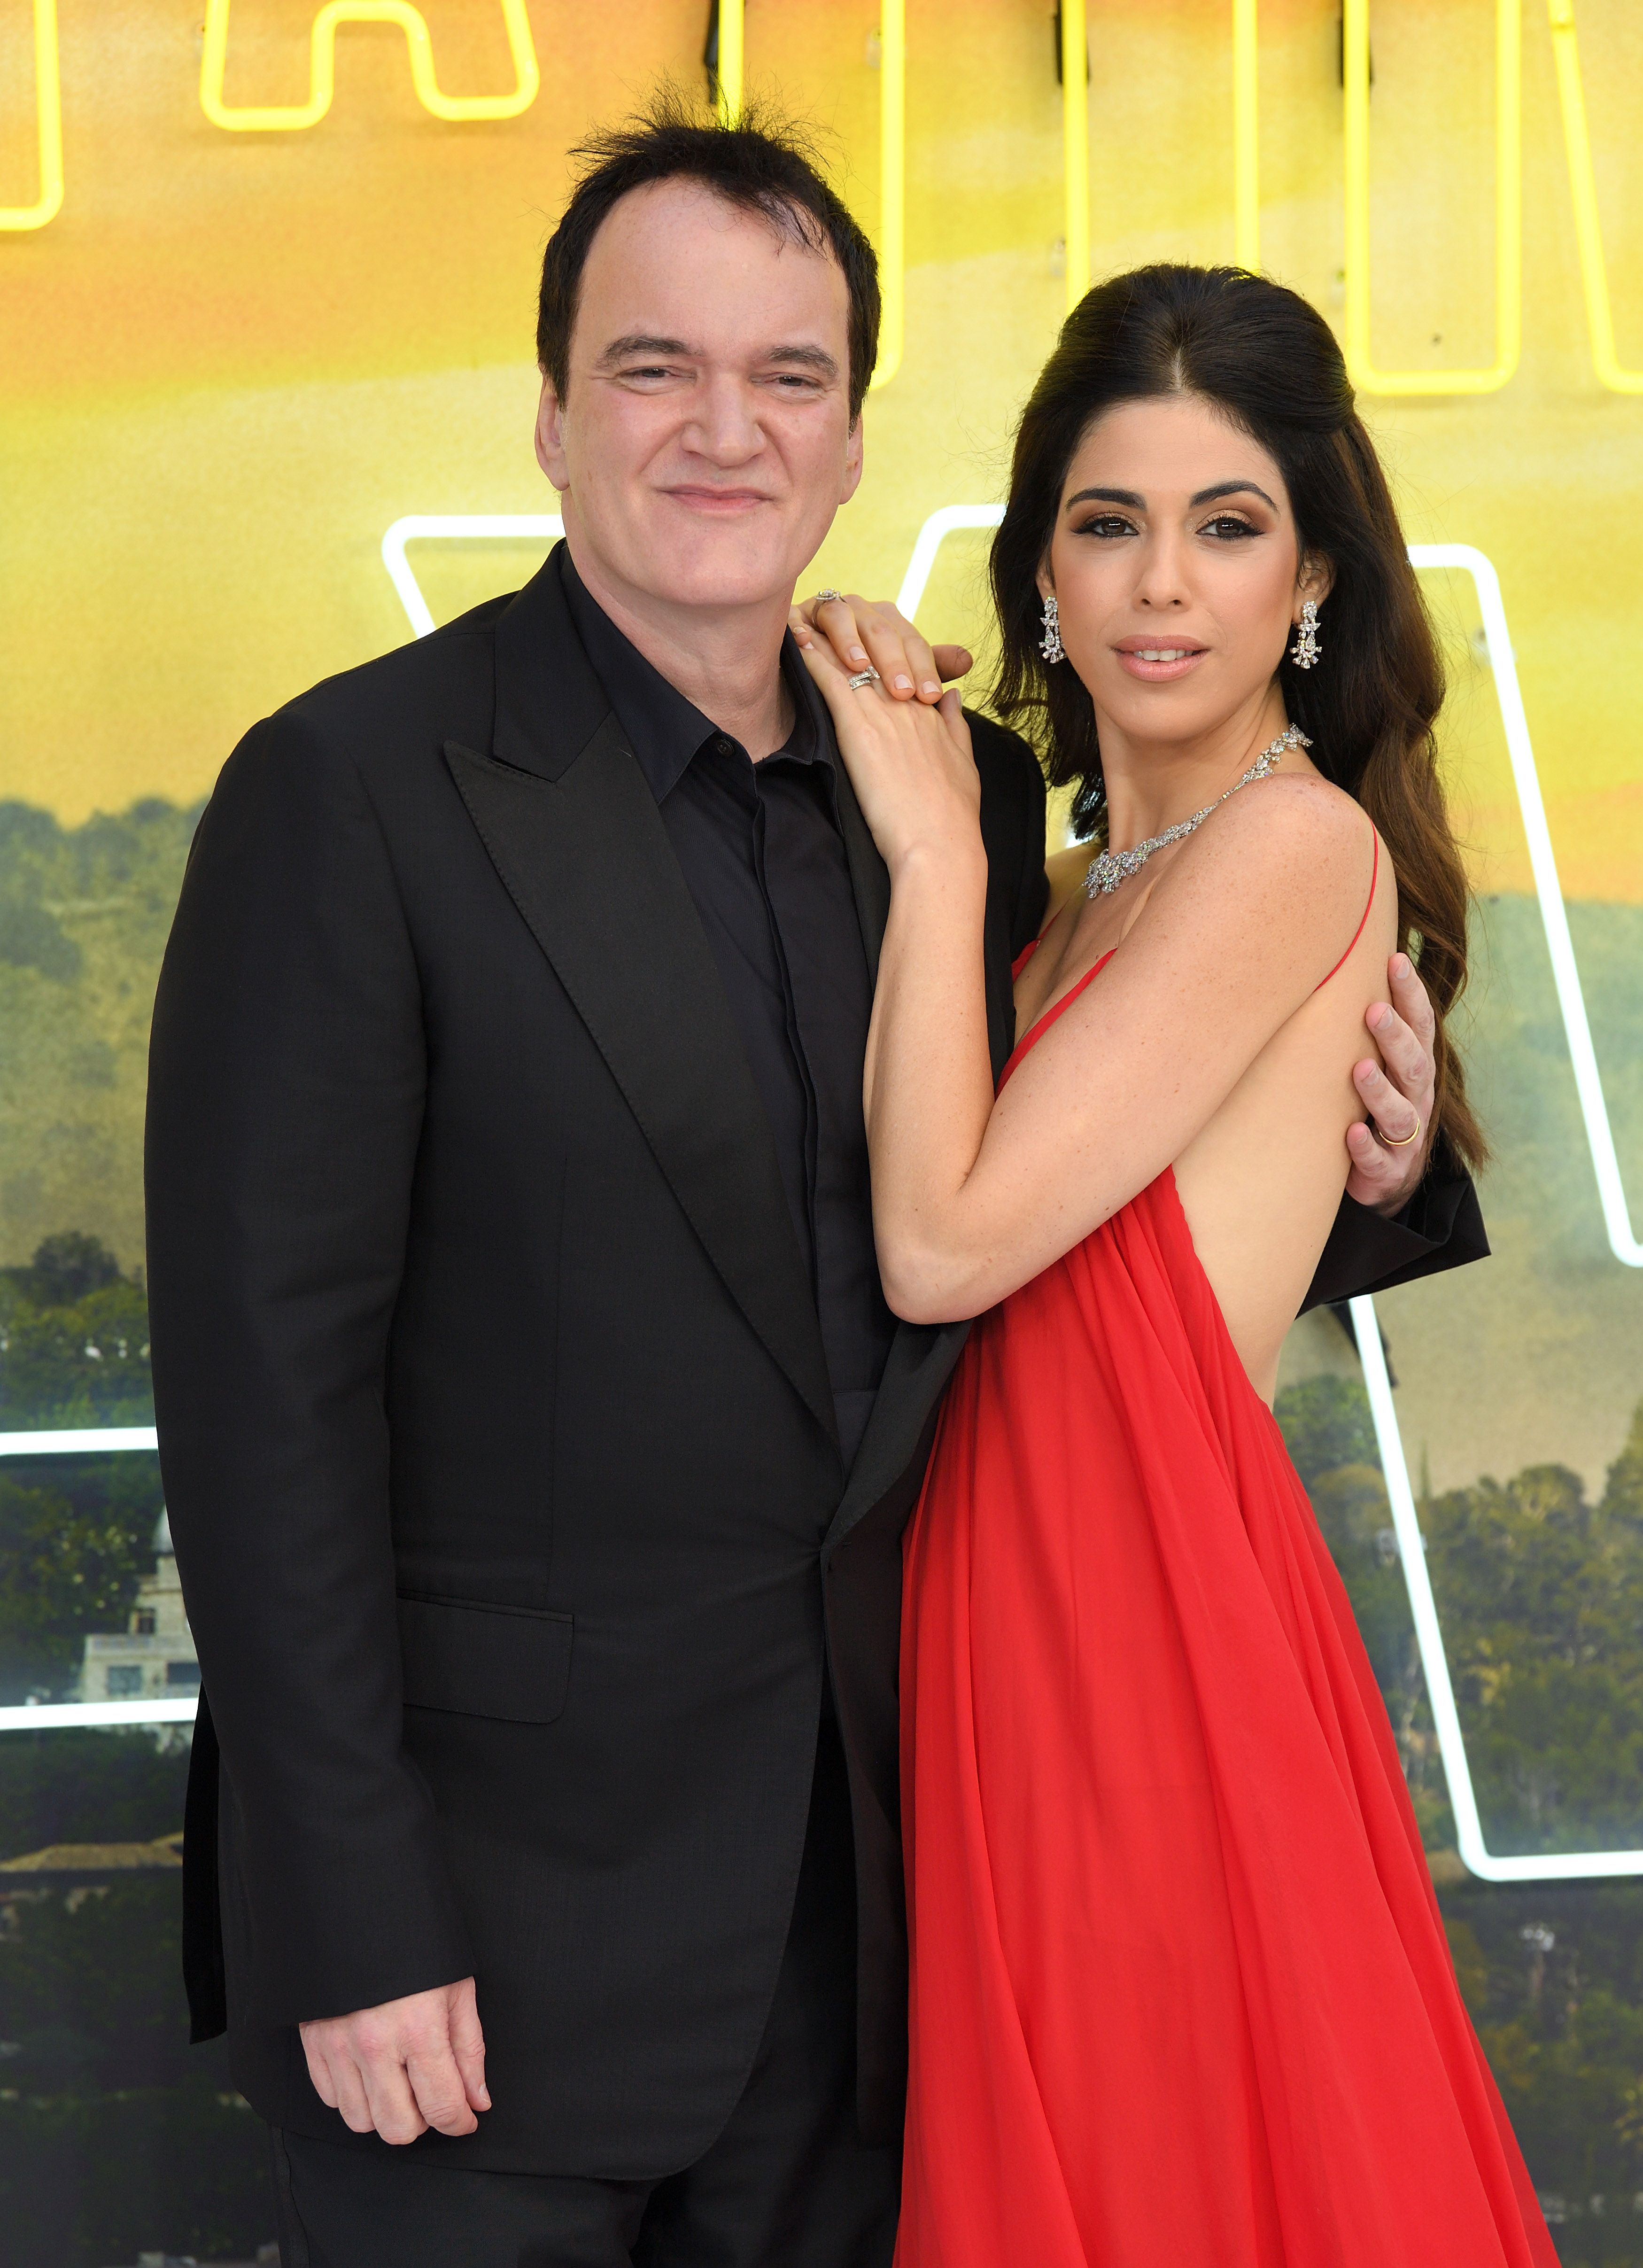 Quentin Tarantino and Daniella Pick at "Once upon a time... in Hollywood" UK premiere in 2019 in London, England |  Source: Getty Images